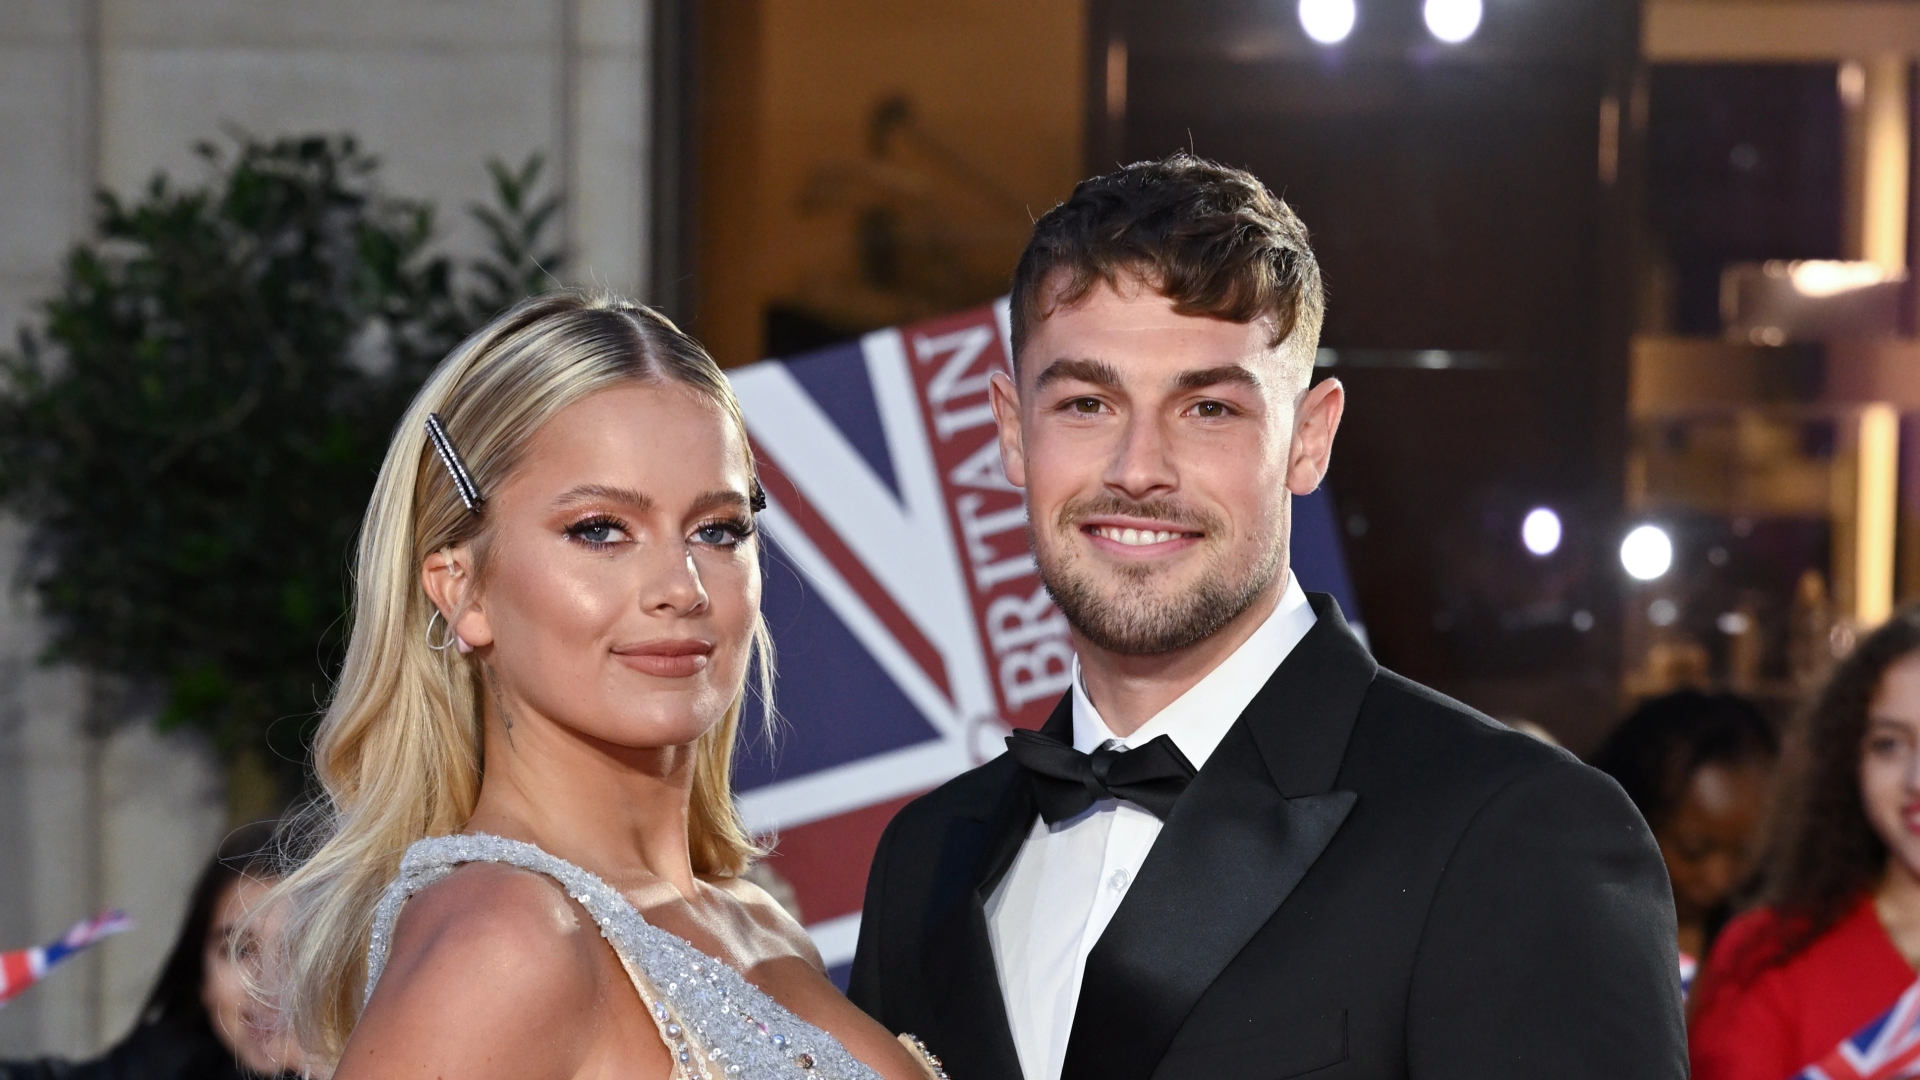 Andrew from Love Island sparks feud rumours and leaves his sister’s management company to join Luca.